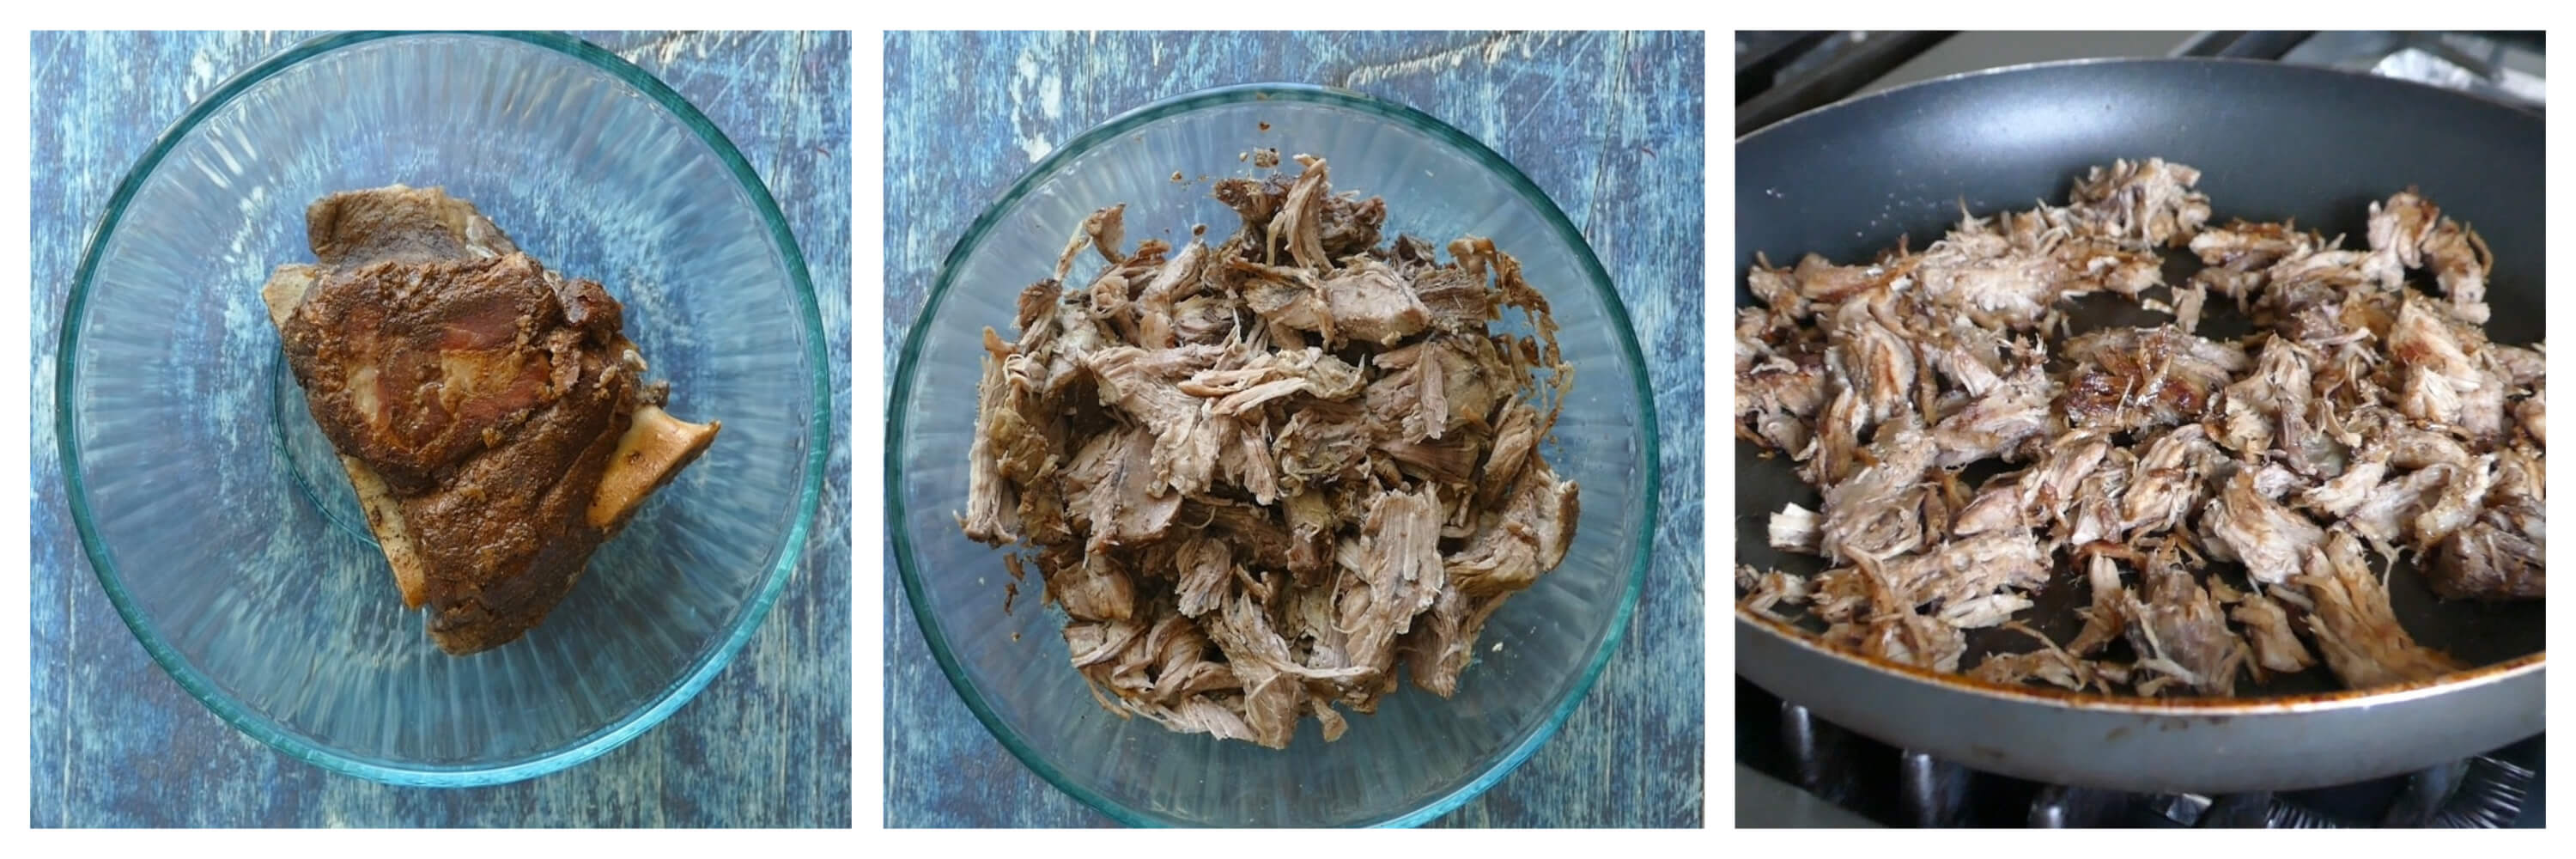 Instant Pot Banh Mi Instructions 2 collage - cooked pork in bowl, shredded, fried - Paint the Kitchen Red